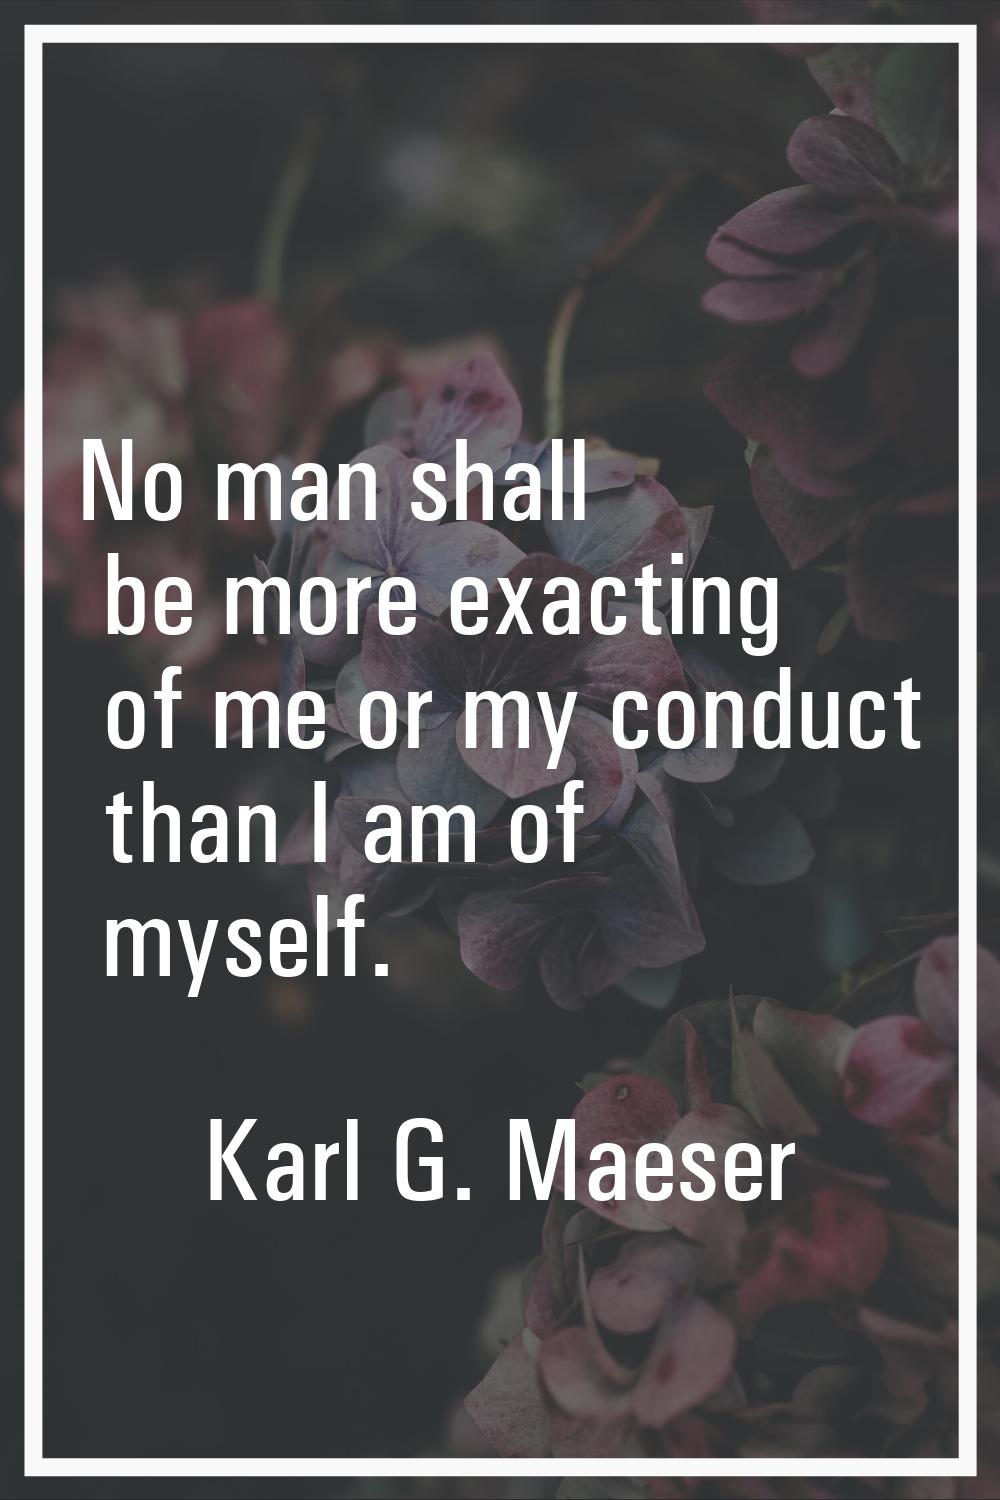 No man shall be more exacting of me or my conduct than I am of myself.